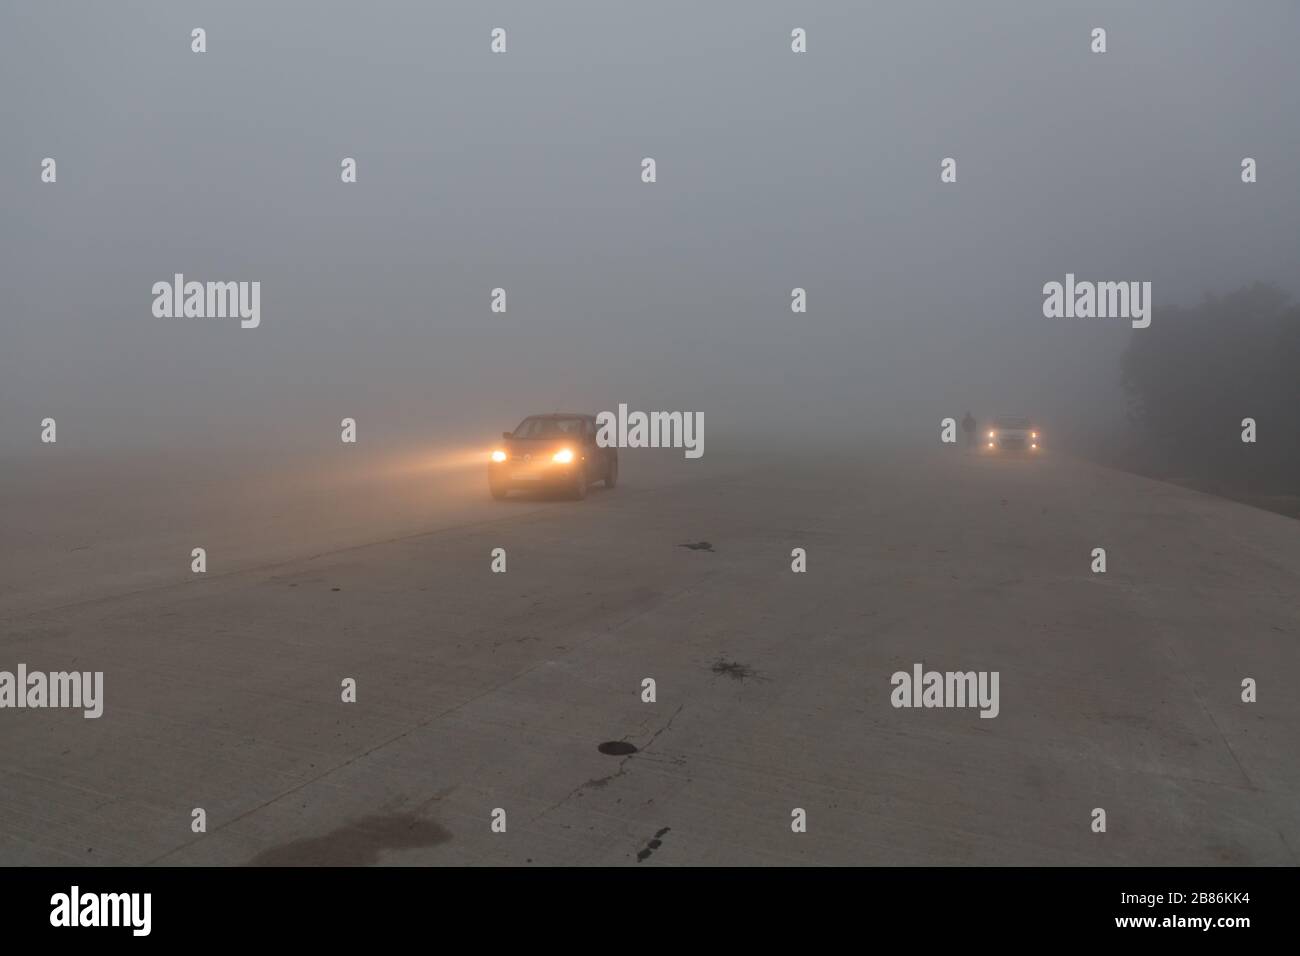 Cars on foggy highway in India Stock Photo